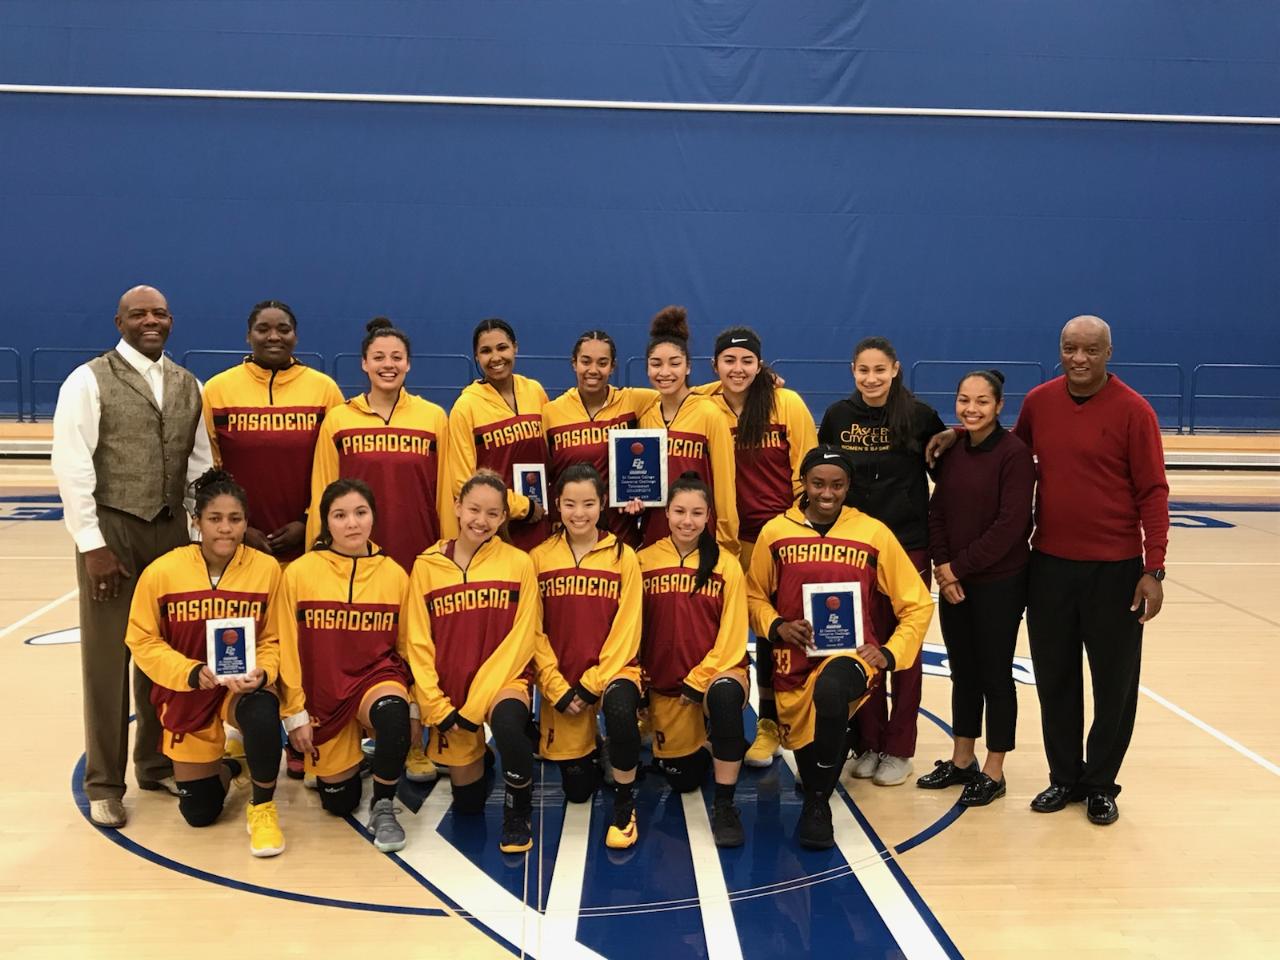 PCC takes a team photo following winning the Crossover Challenge Tournament title Friday night. MVP Dariel Johnson is in the bottom row far right holding her award.